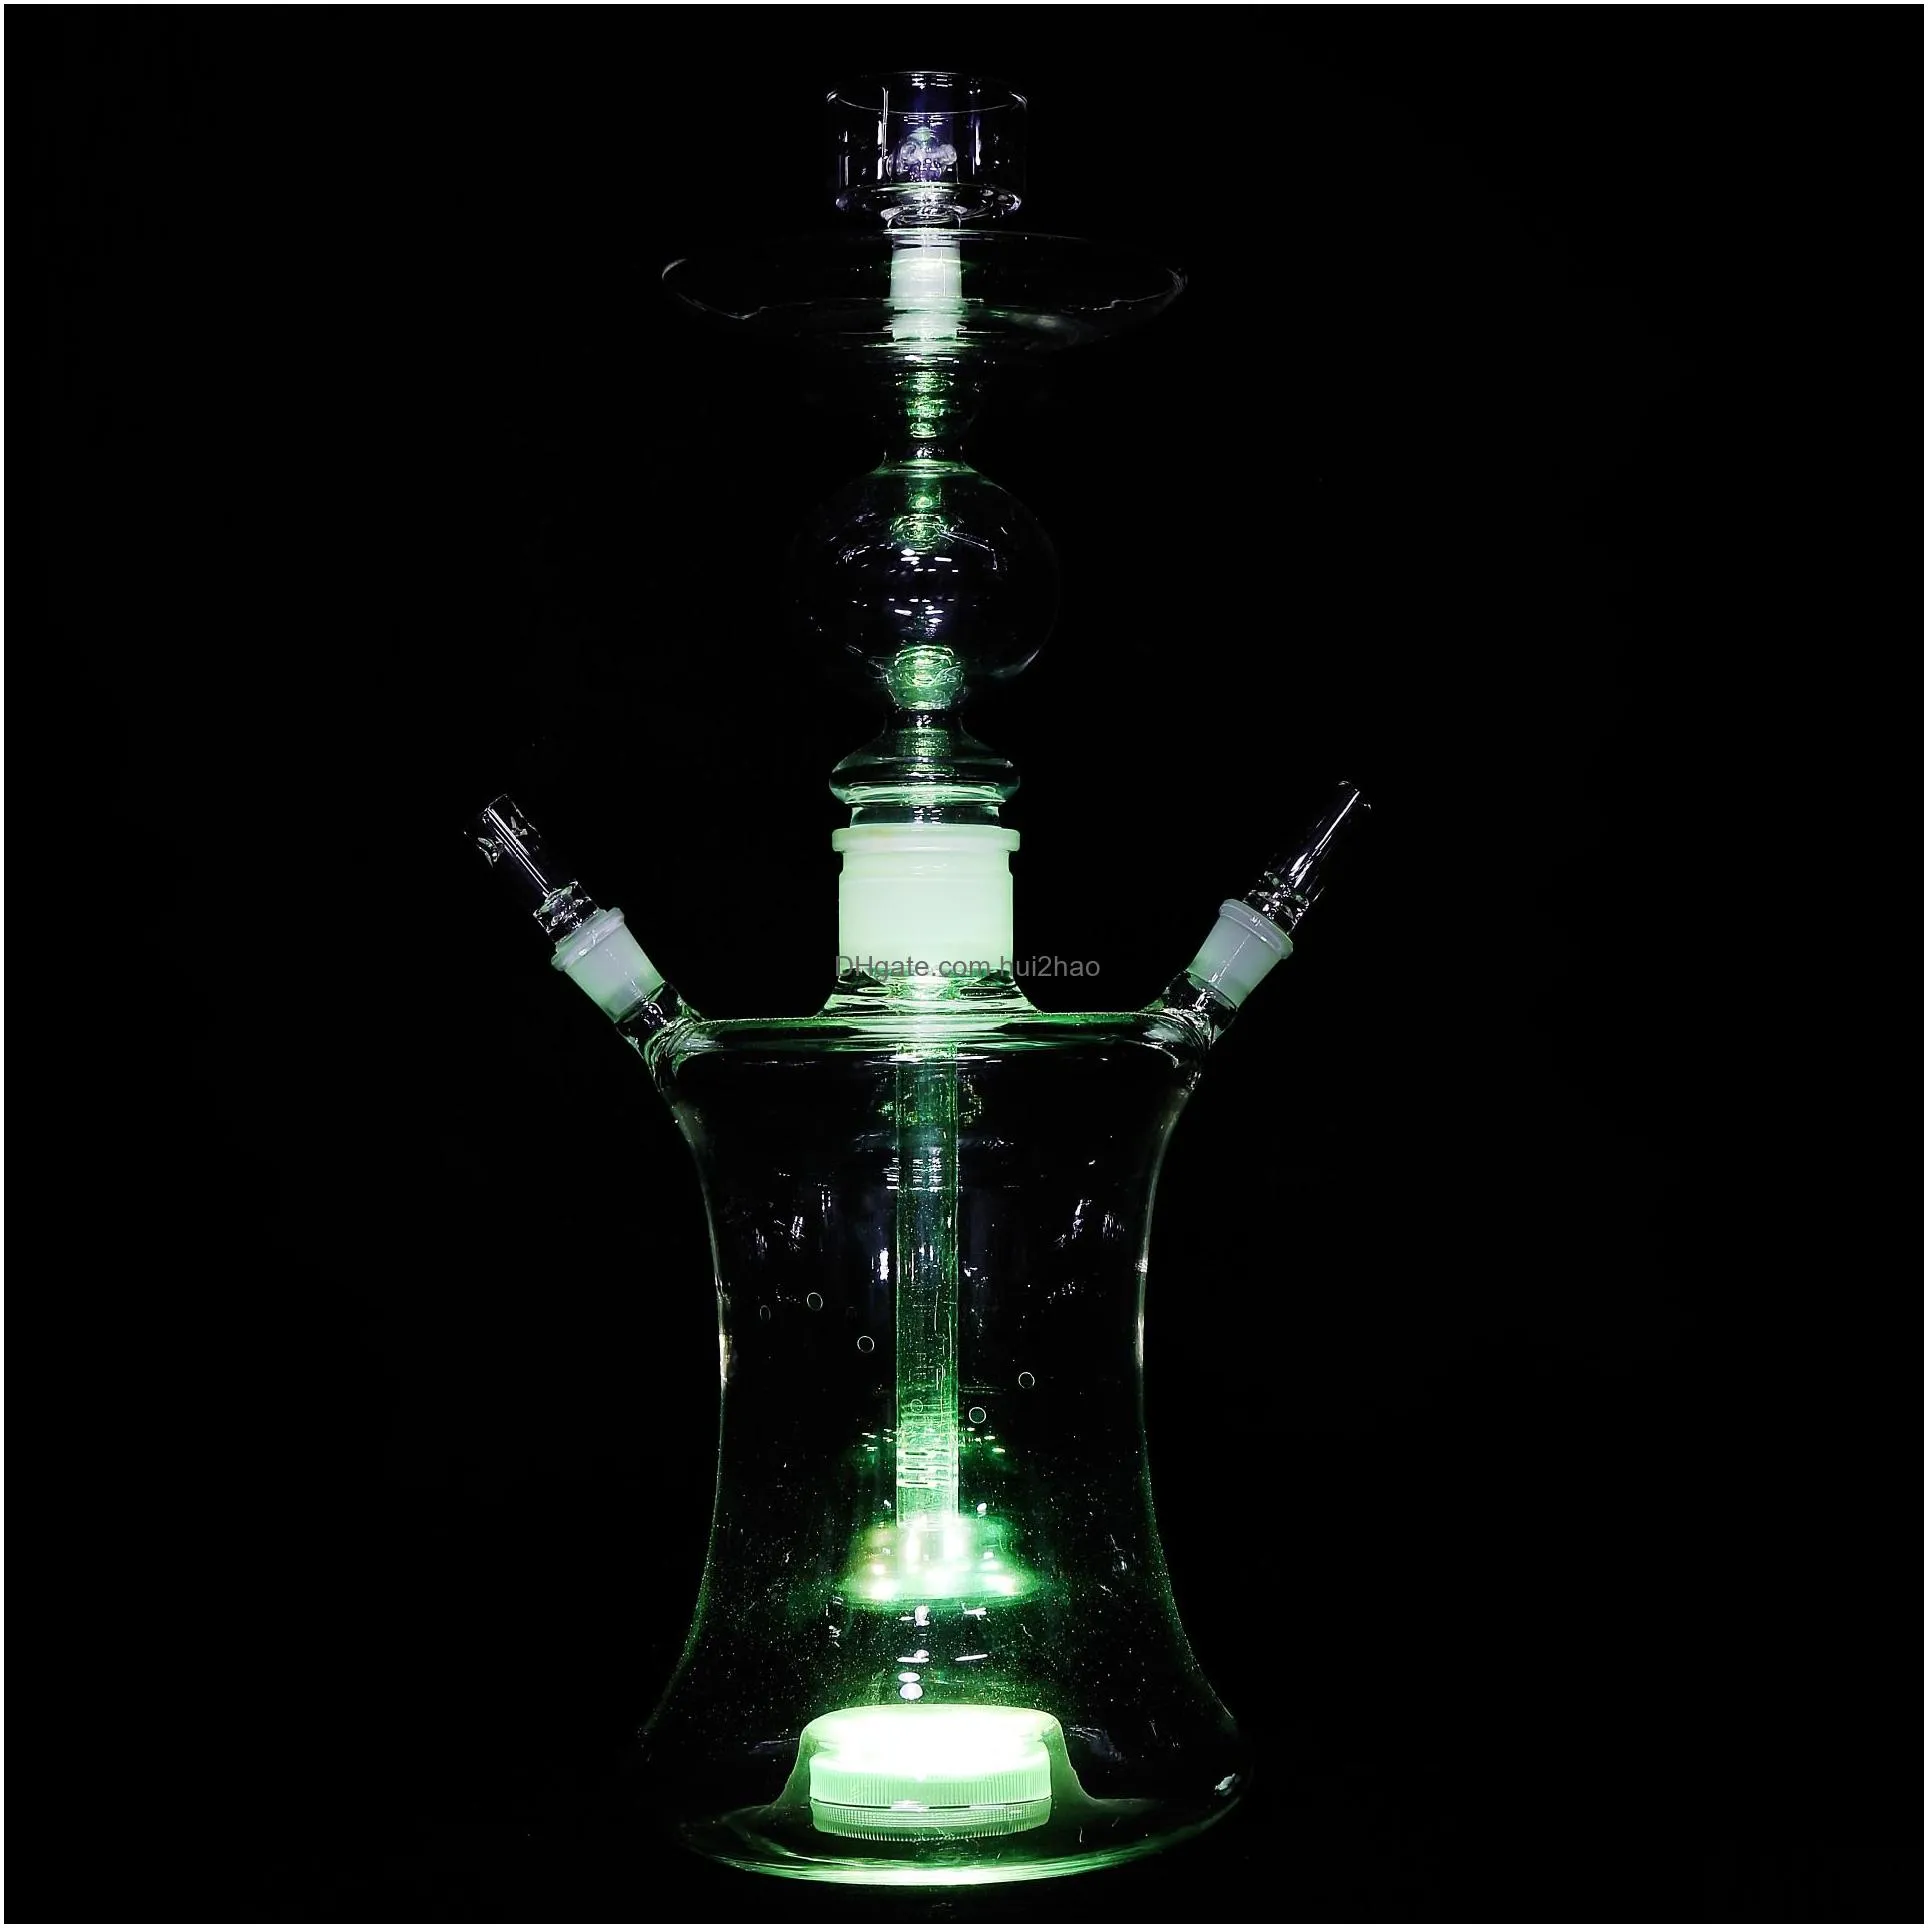 53cm tall hookah with light glass water smoking cigaret filter holder tobacco pipes portable 2021 smoke accessories in stock